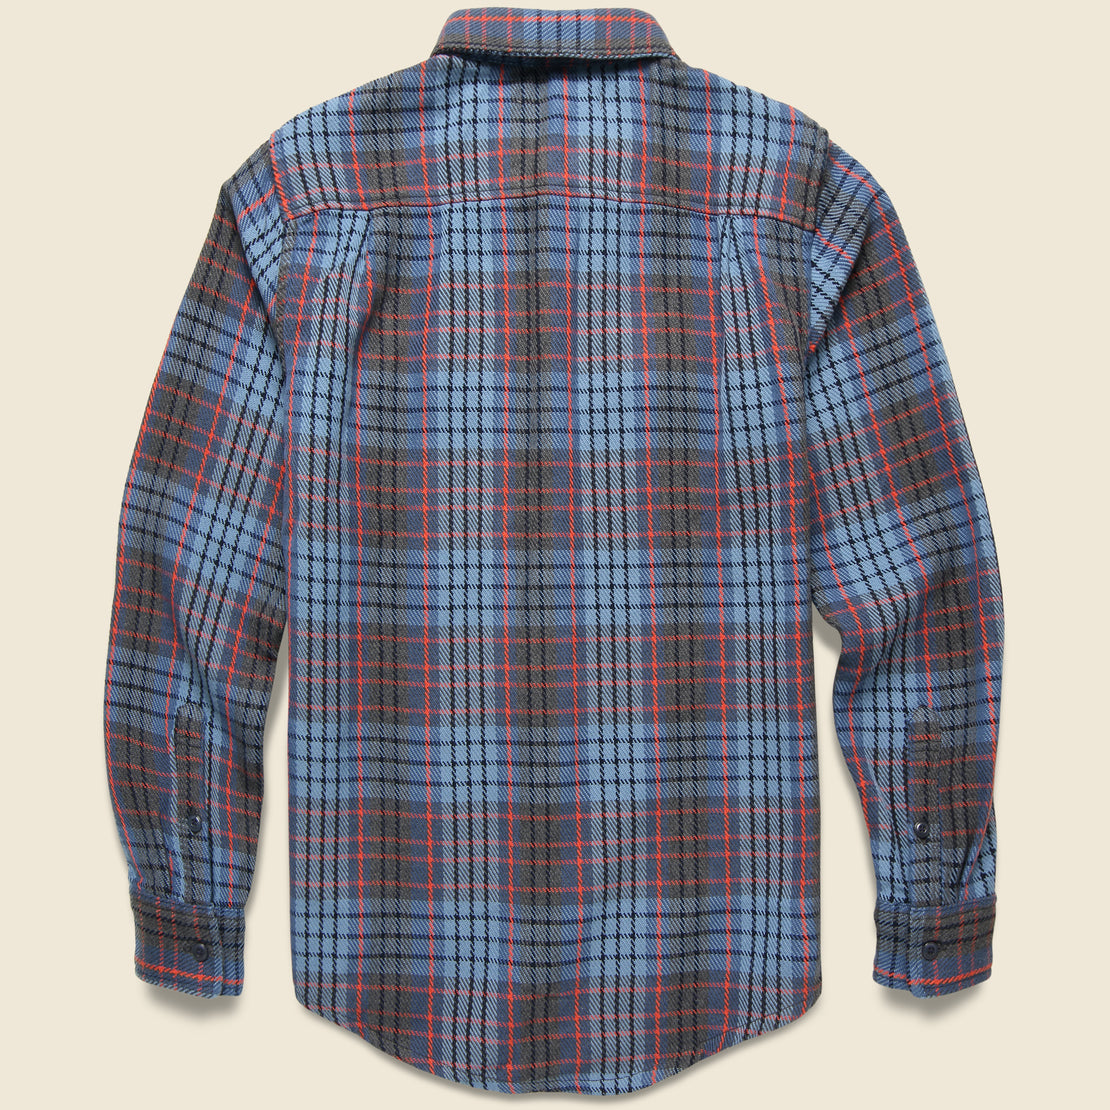 Blanket Shirt - Pacific Old Coast Plaid - Outerknown - STAG Provisions - Tops - L/S Woven - Plaid